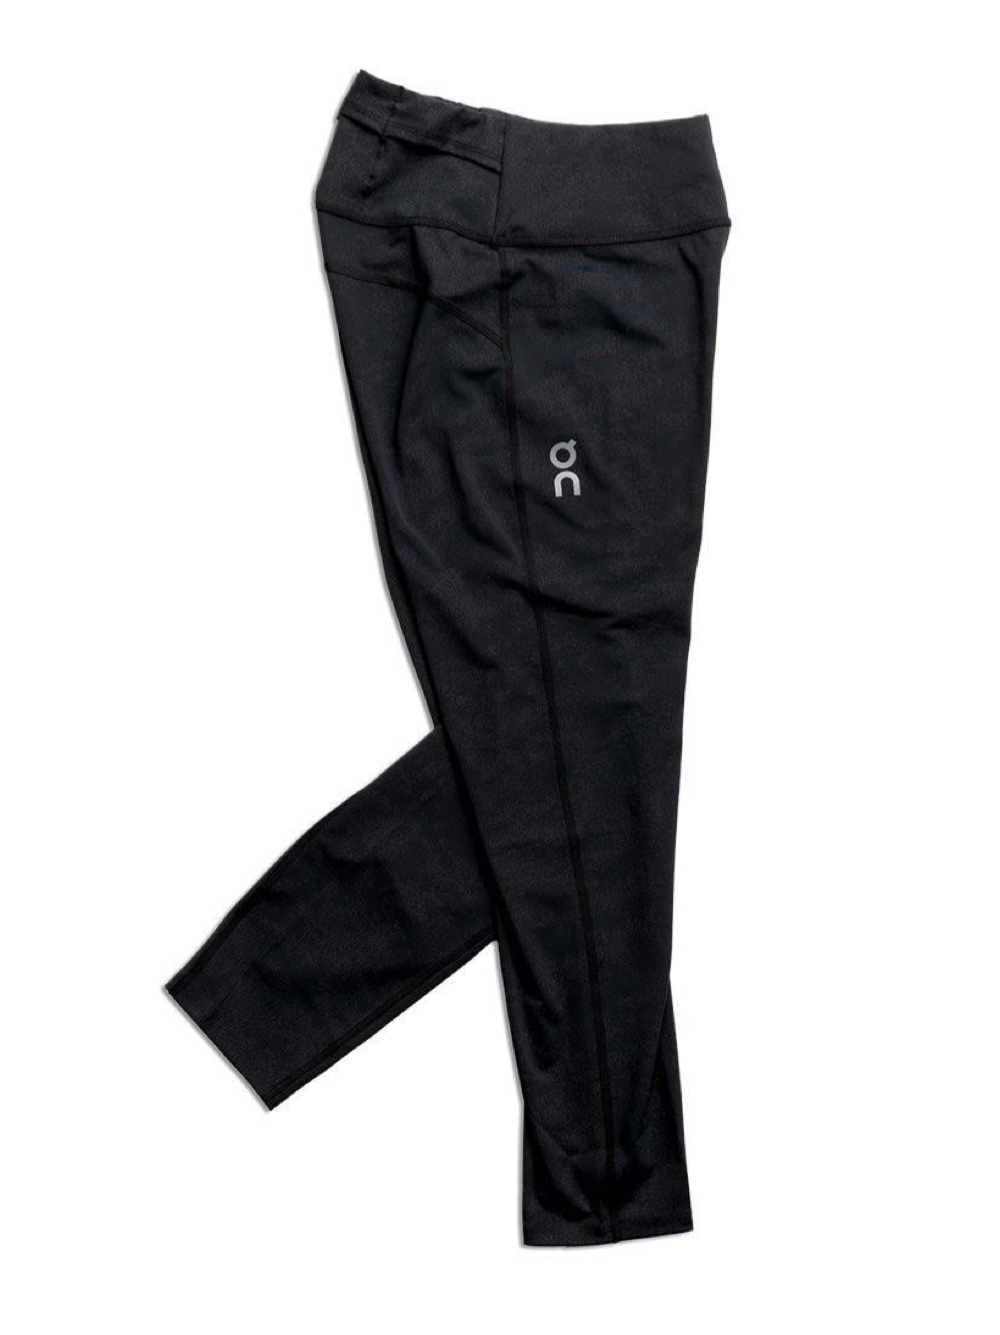 Performance Tights 7/8: Women's cropped running tights with phone pocket